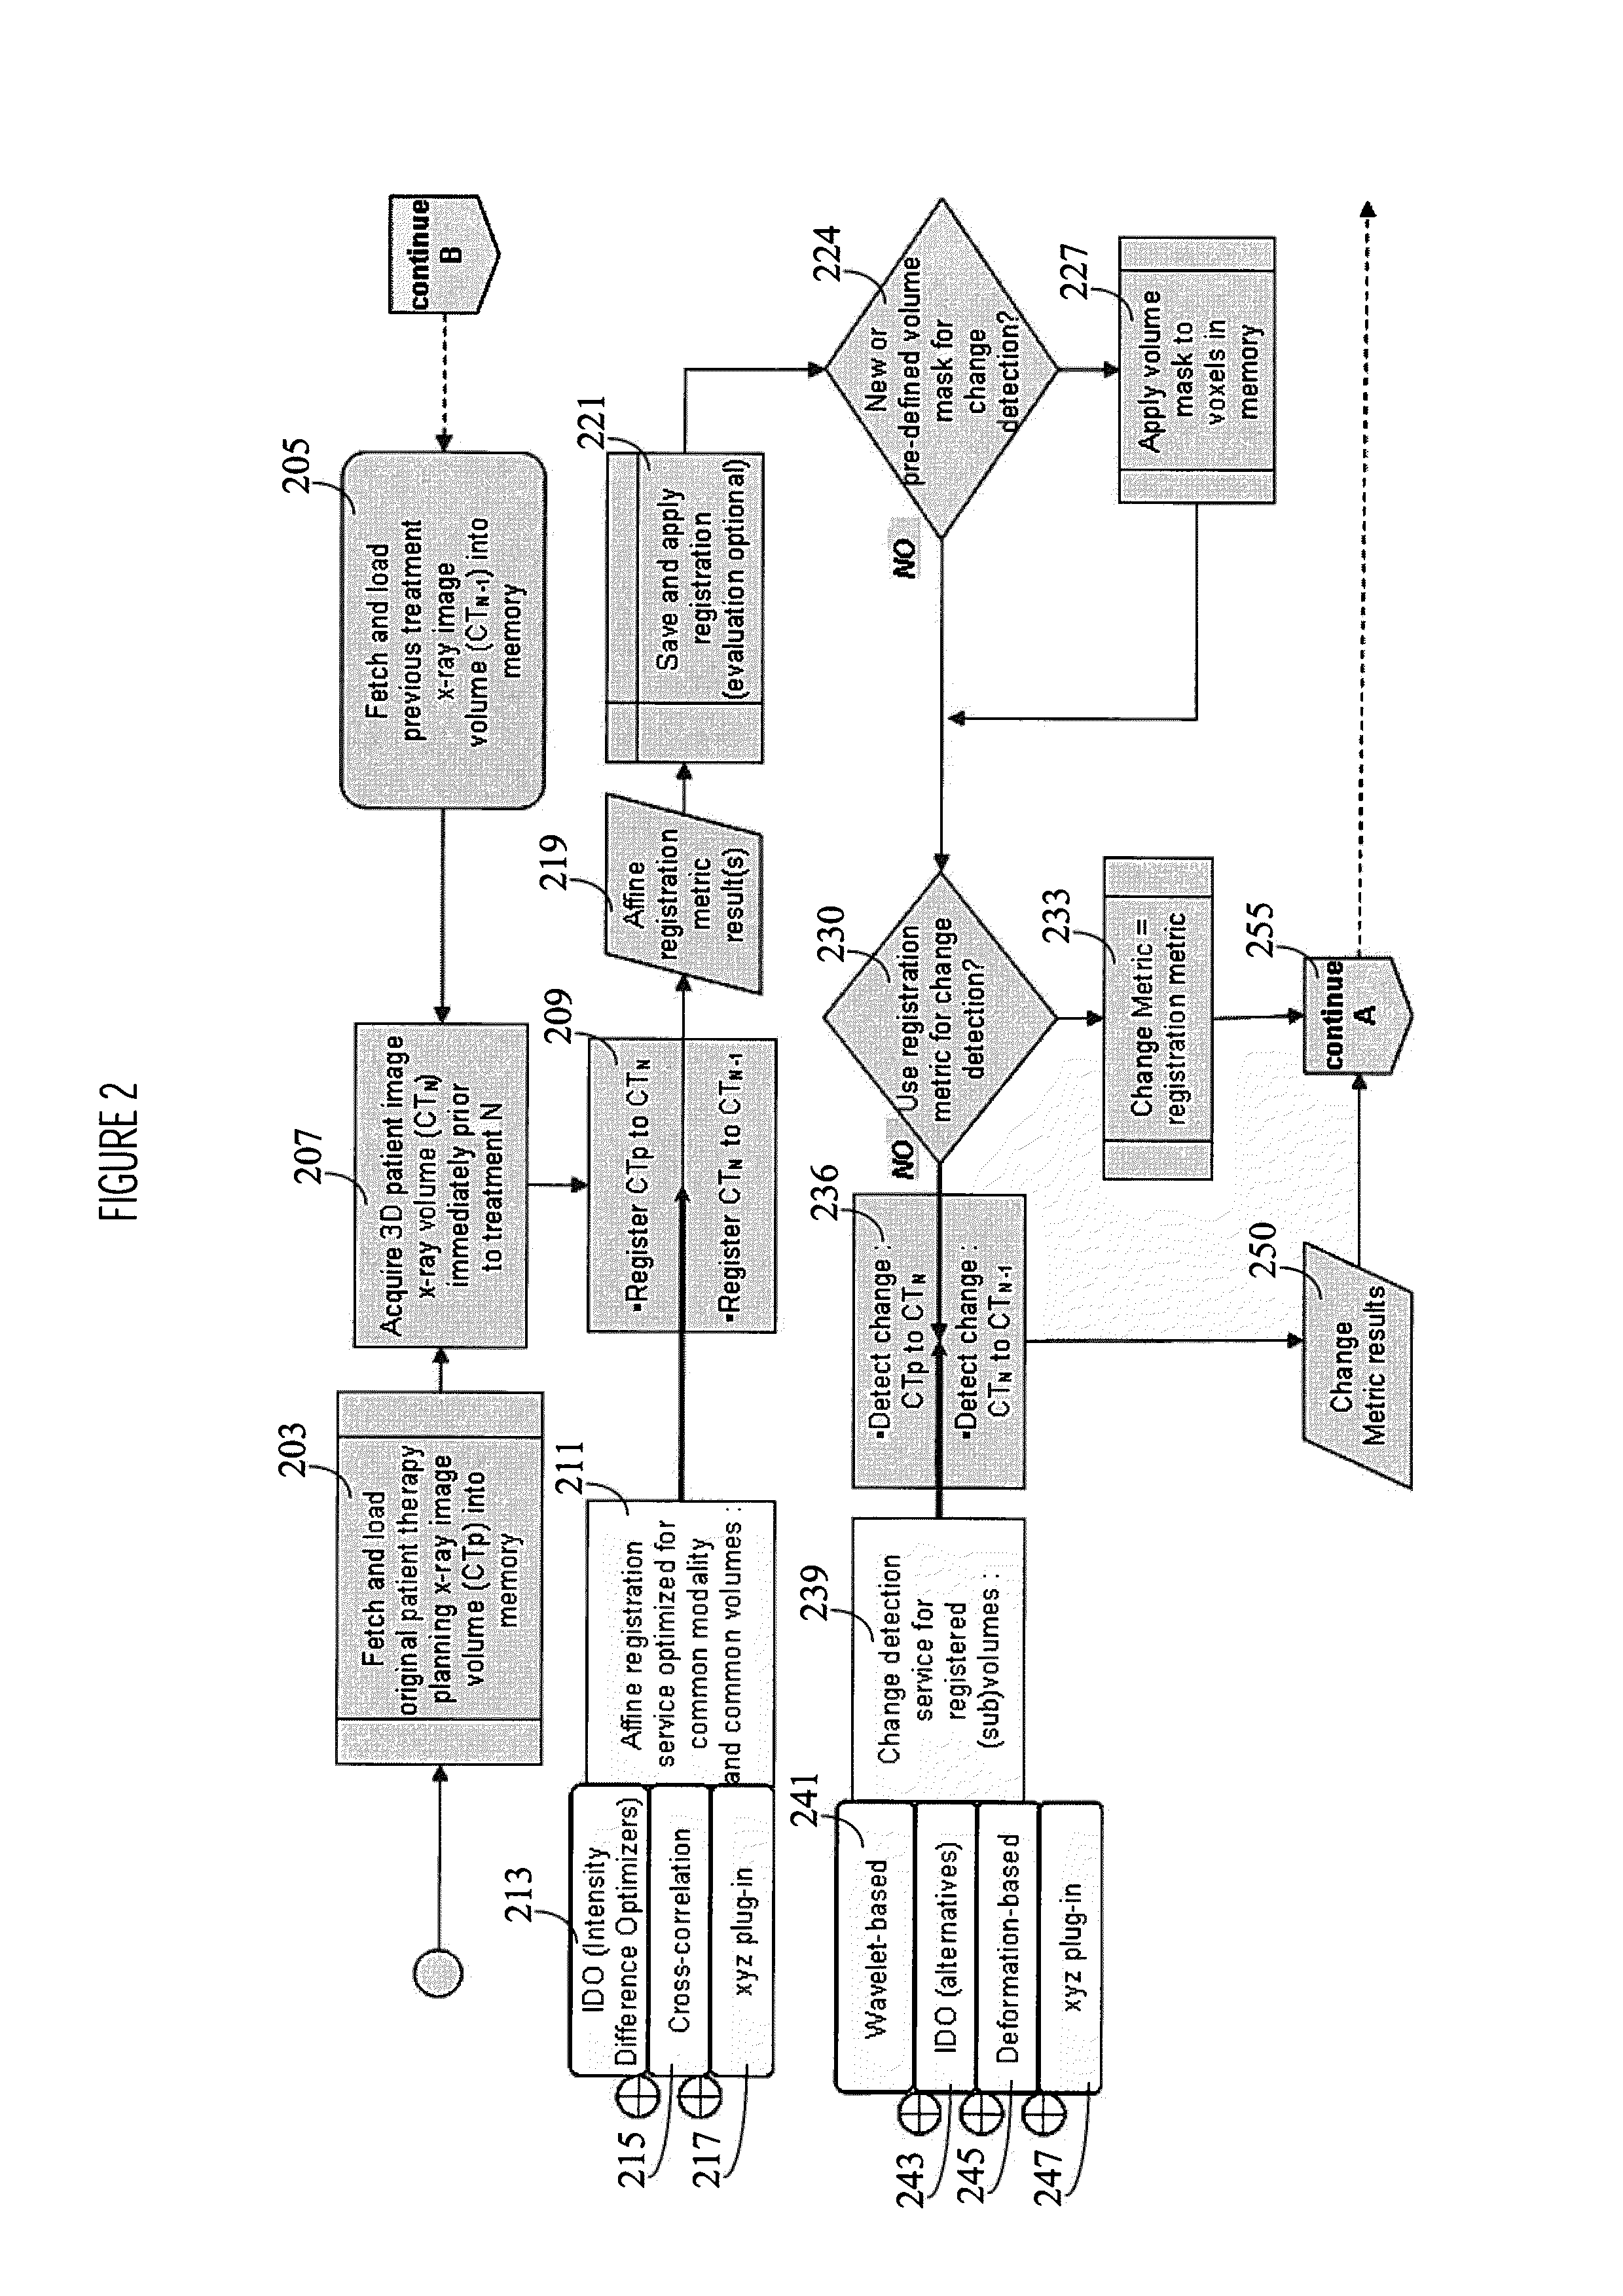 Medical imaging processing and care planning system